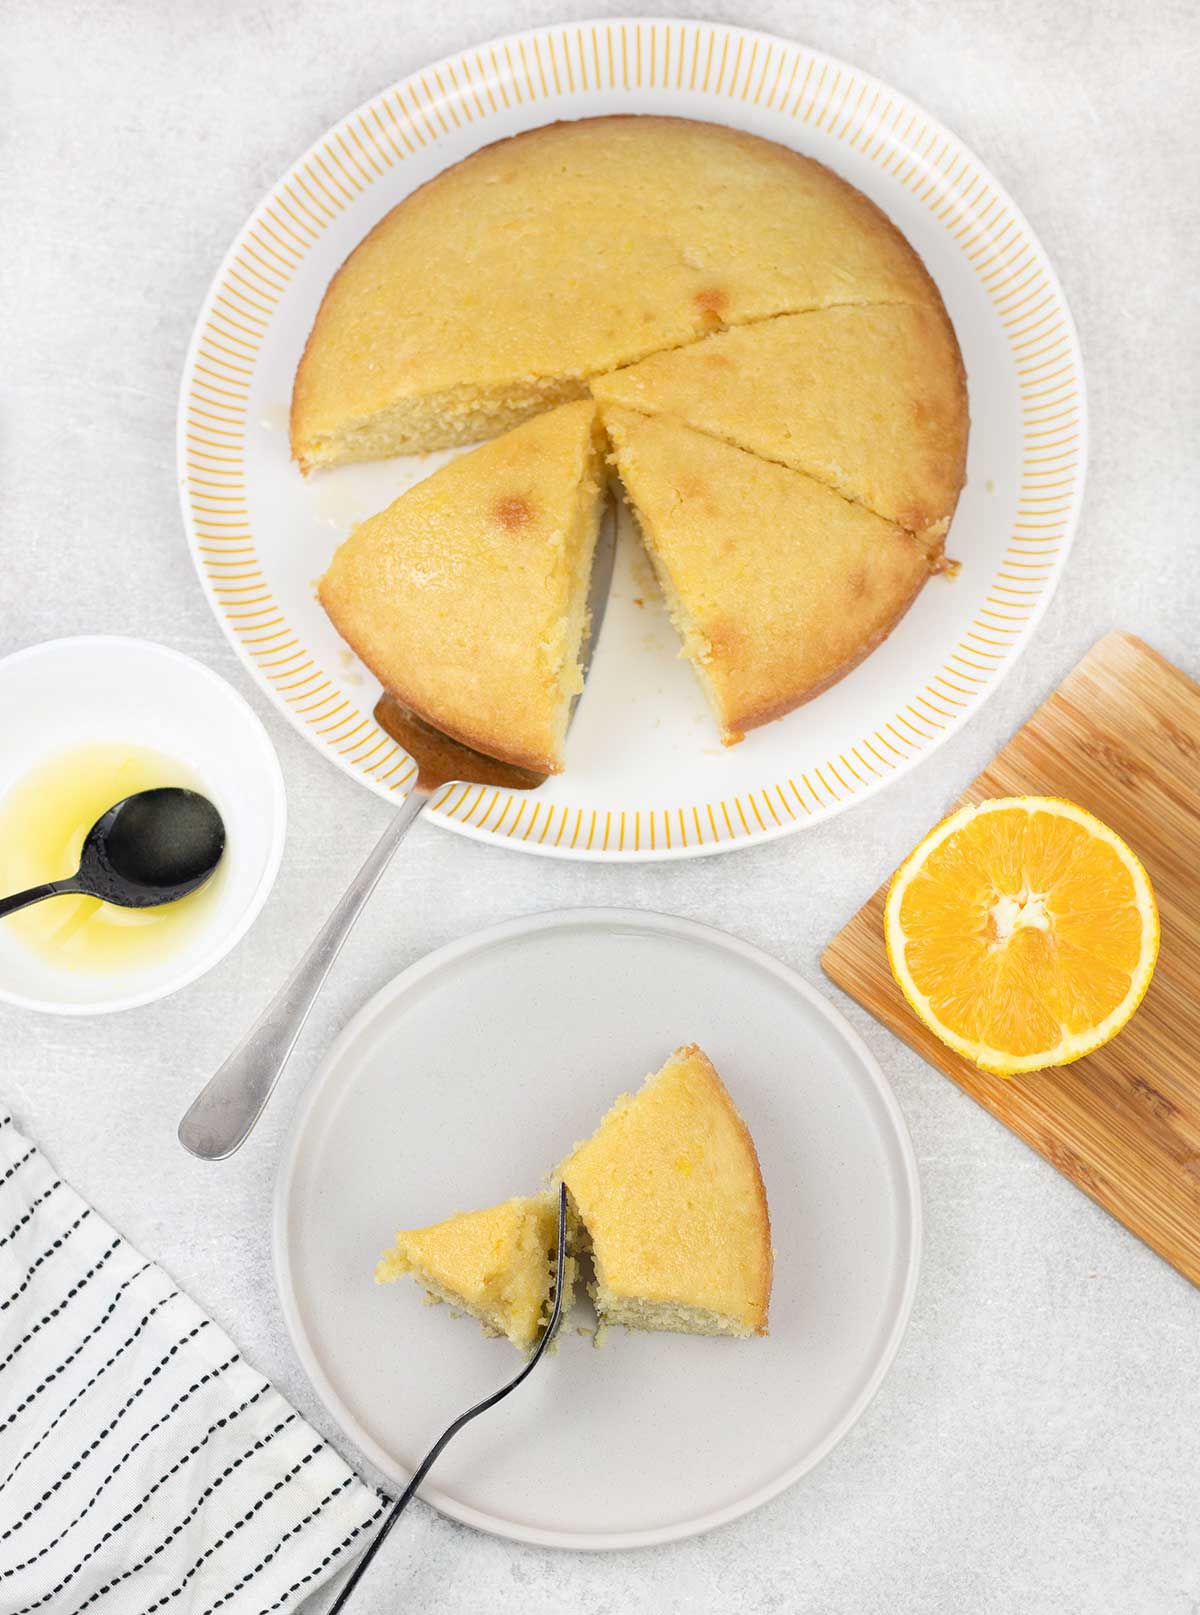 Orange Drizzle Cake and an orange and a cake slice in a plate.